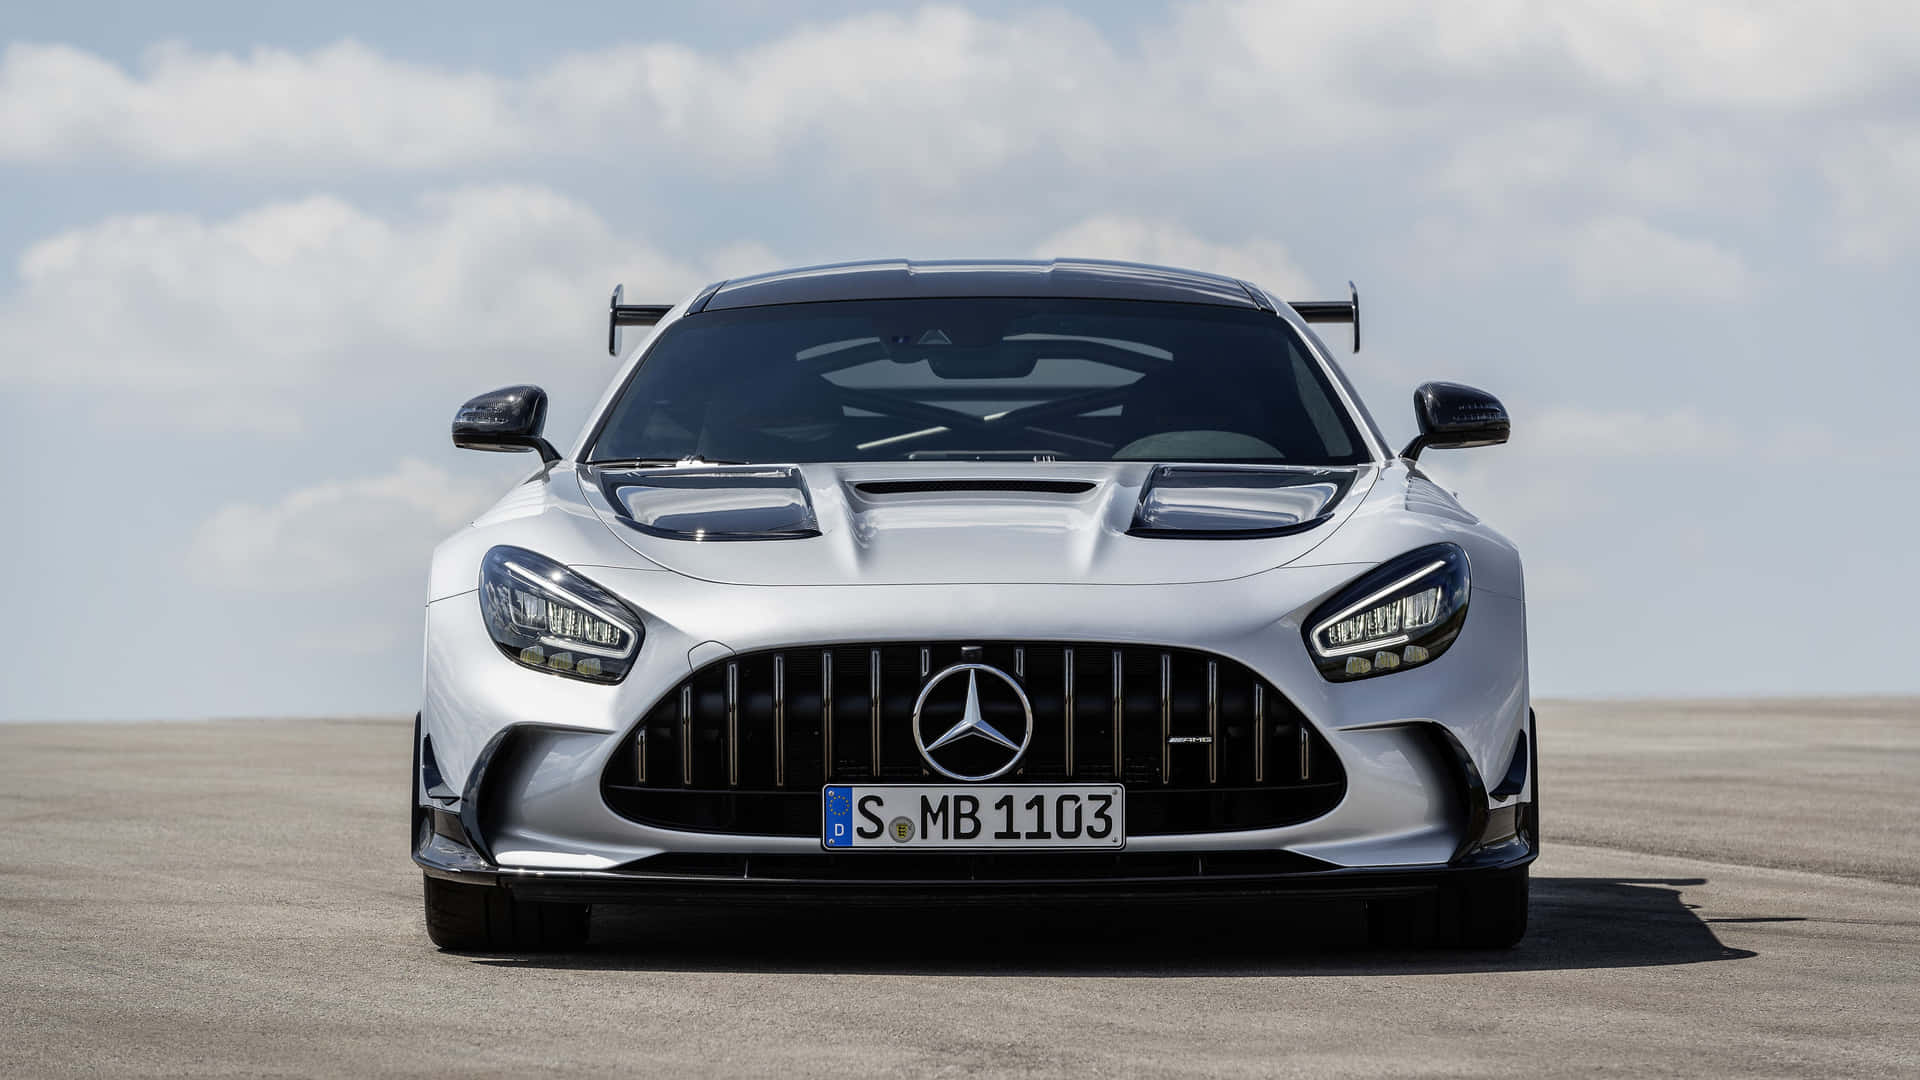 Experience the power and beauty of the Mercedes GTS Wallpaper